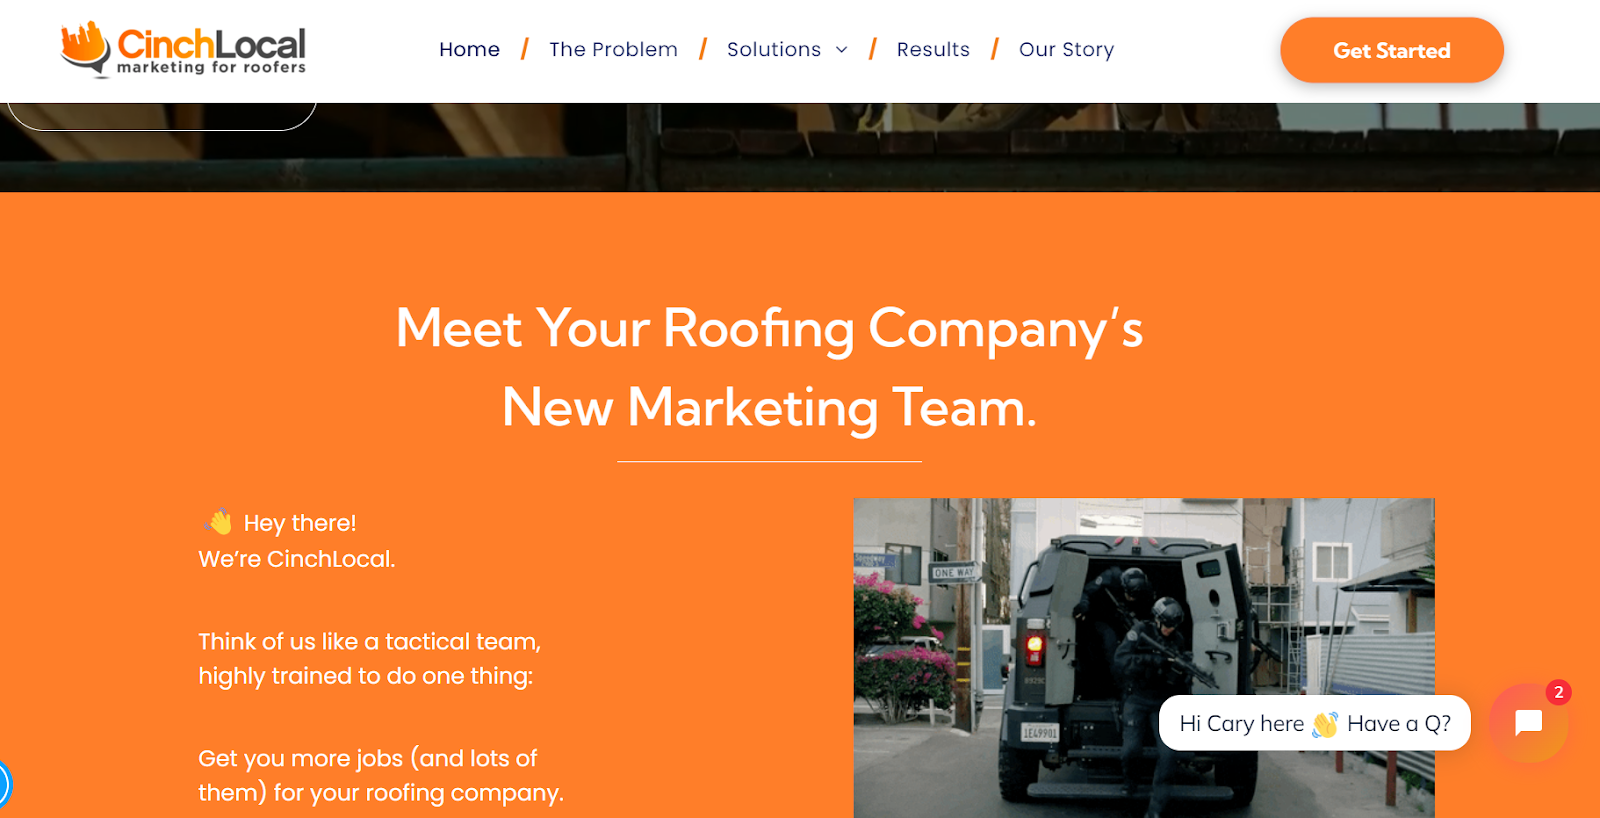 Cinch Local listed as one of the best SEO companies for Roofers